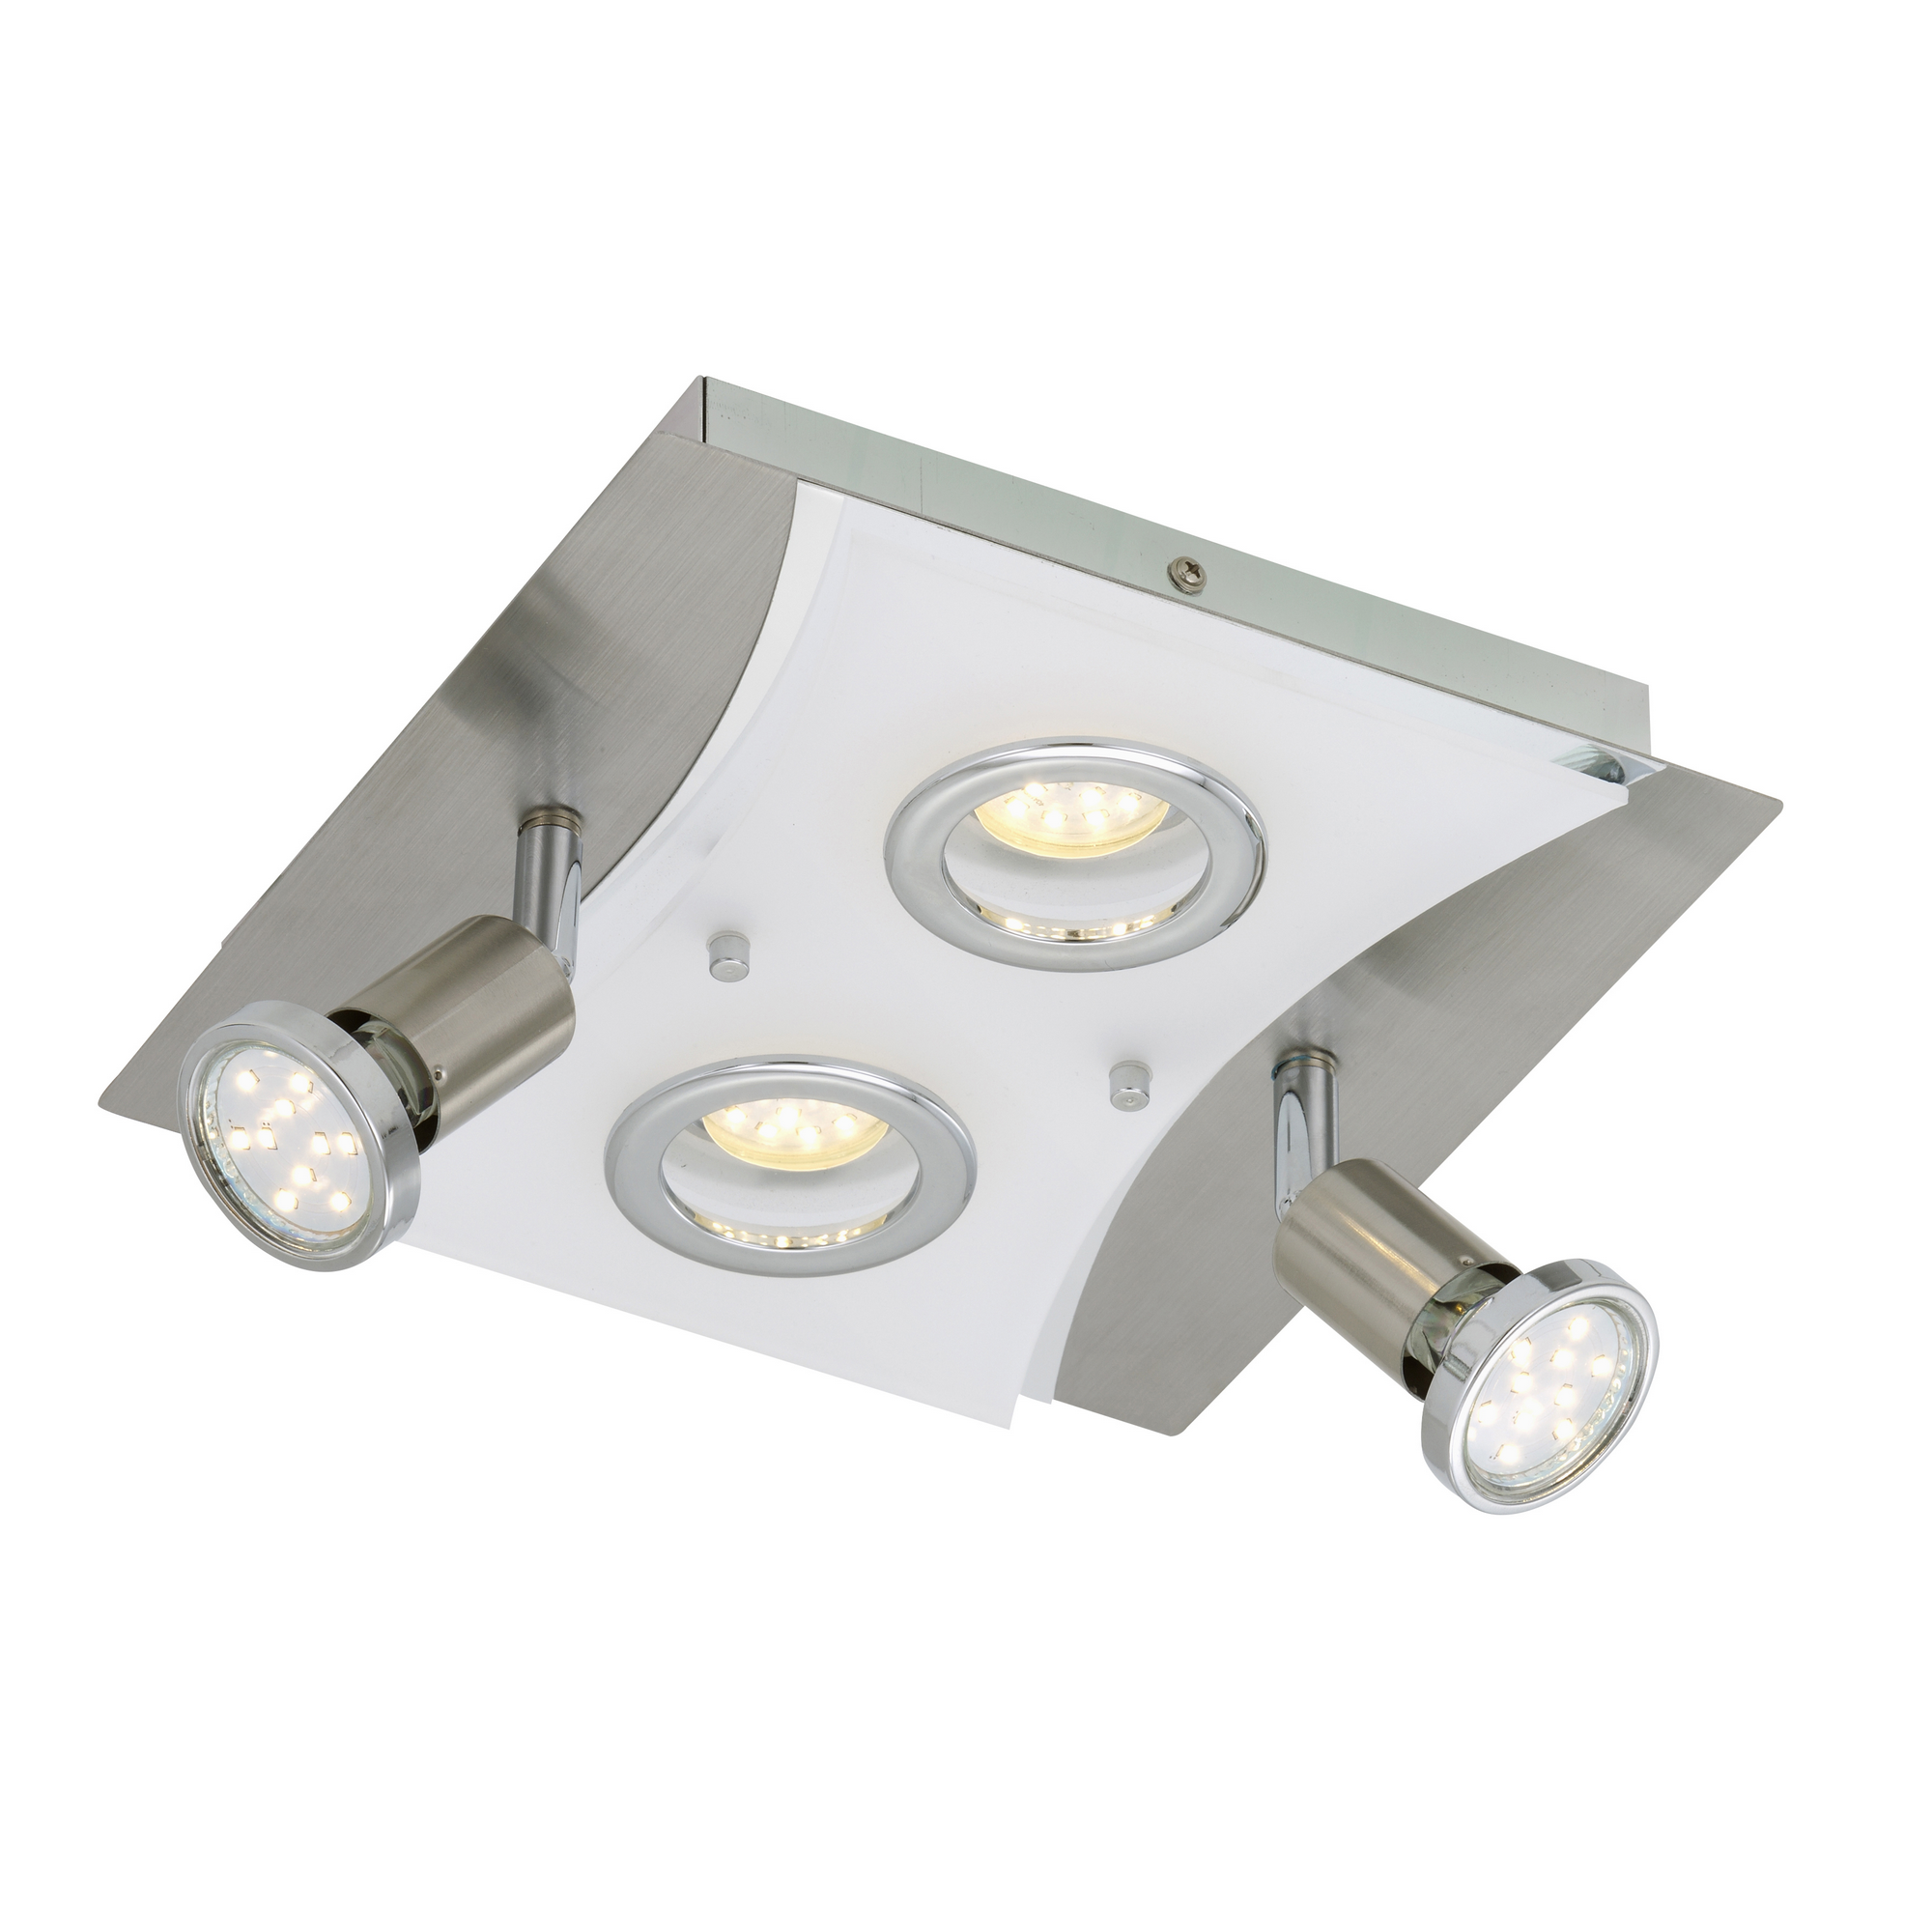 LED-Strahler 'Riposo' nickelfarben 4-flammig + product picture